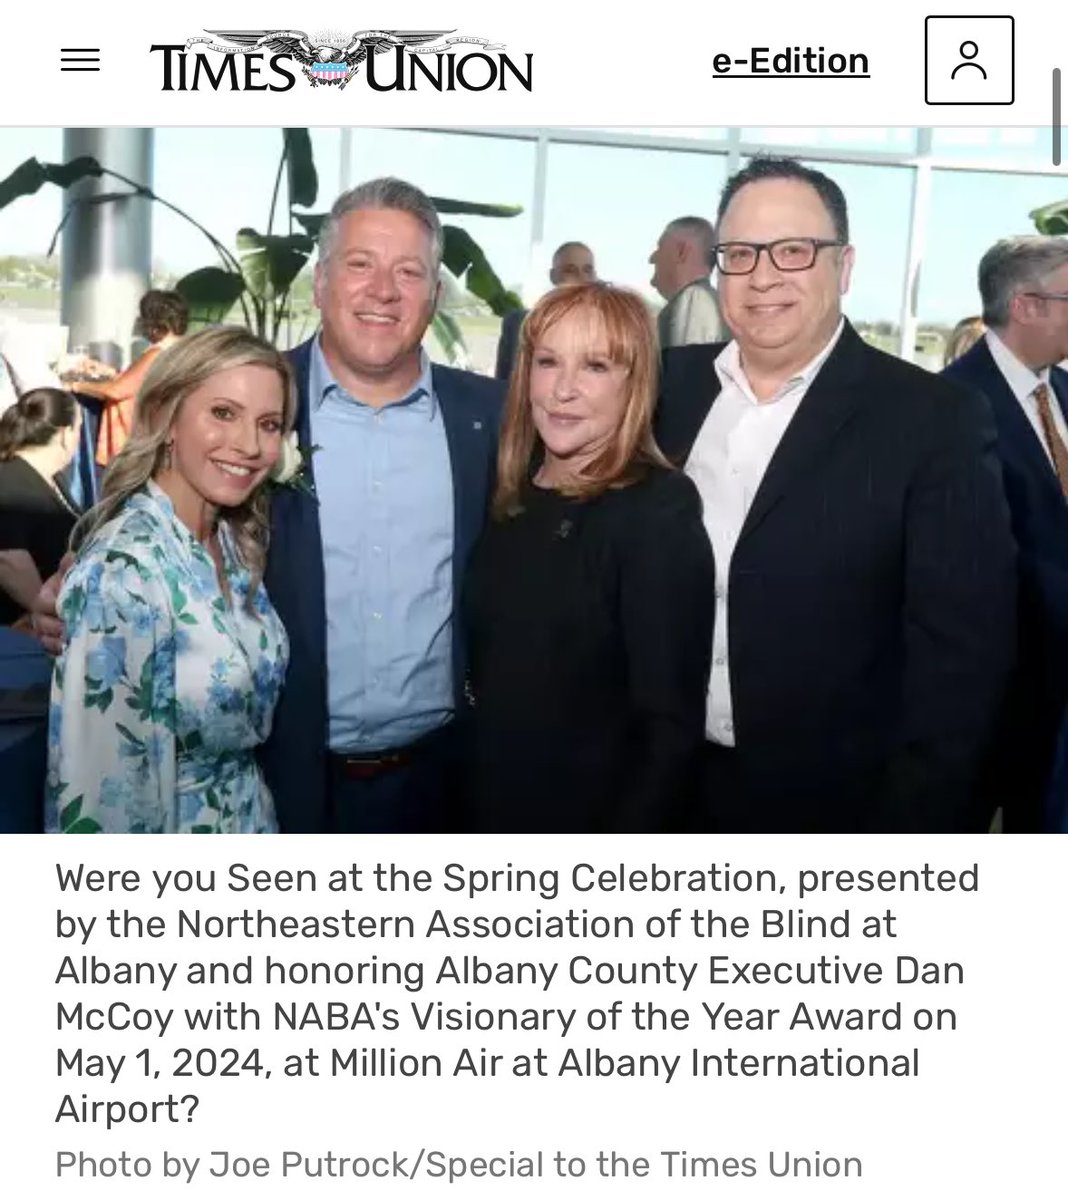 SEEN of the CRIME BLIND Brendan Lyins missing the obvious element in the Dan McCoy & Jeff “Who’s Got The Blow” Jamison story - his own “newspaper” documented McCoy’s boys pre-gaming at the “totally not county business” Dan McCoy “Visionary” award event at Million Air - likely